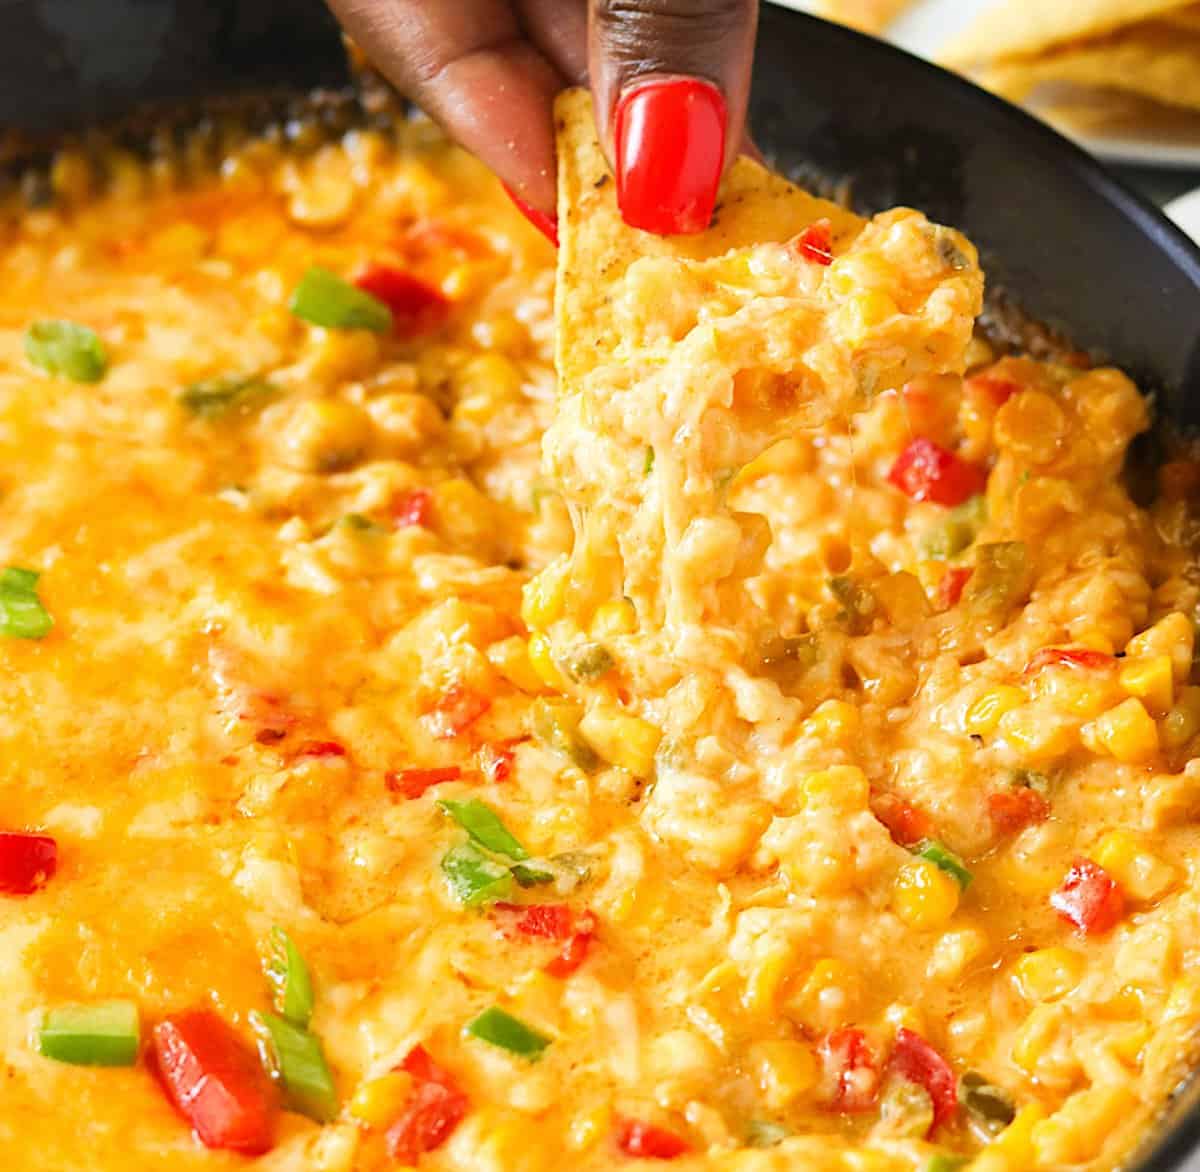 Diving into hot corn dip fresh from the oven, pulling up tender corn and gooey cheese for the win